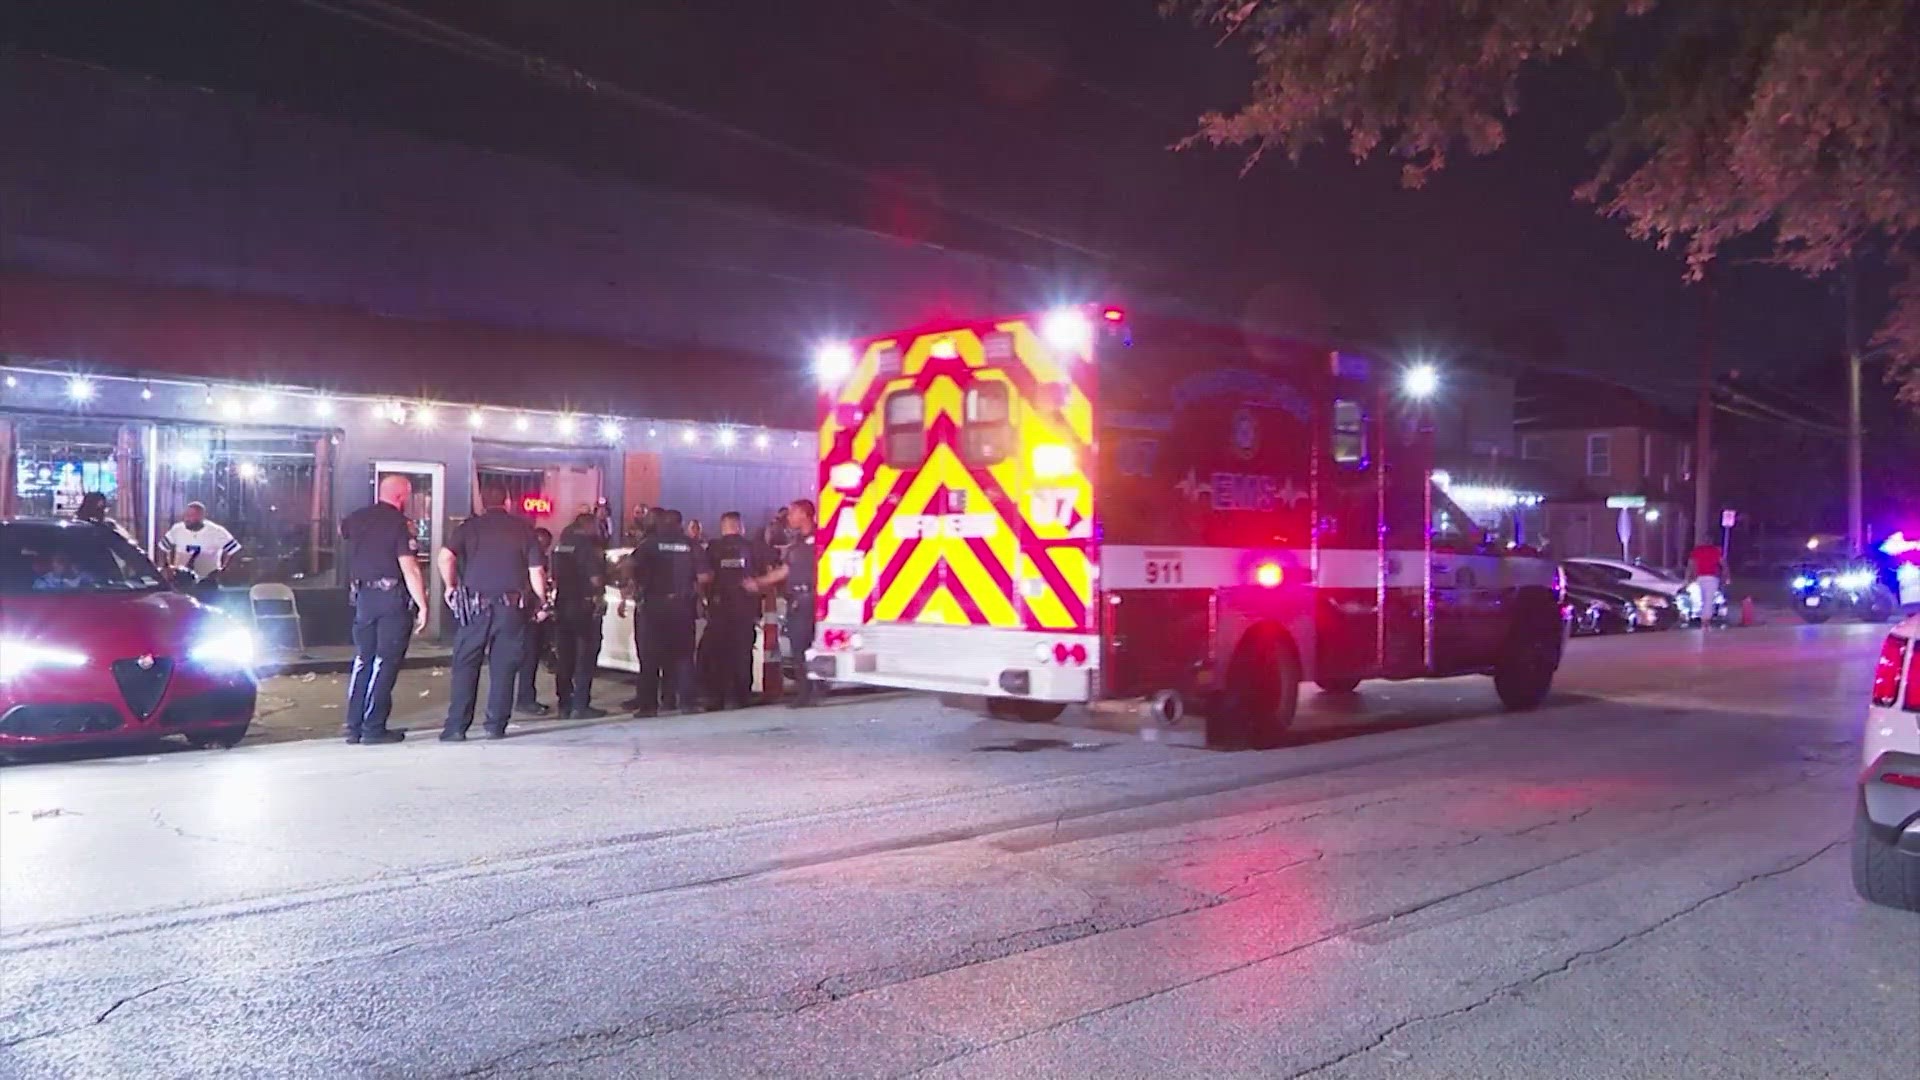 Three people were injured in a shootout at a bar in downtown Houston late Sunday night, according to the Houston Police Department.